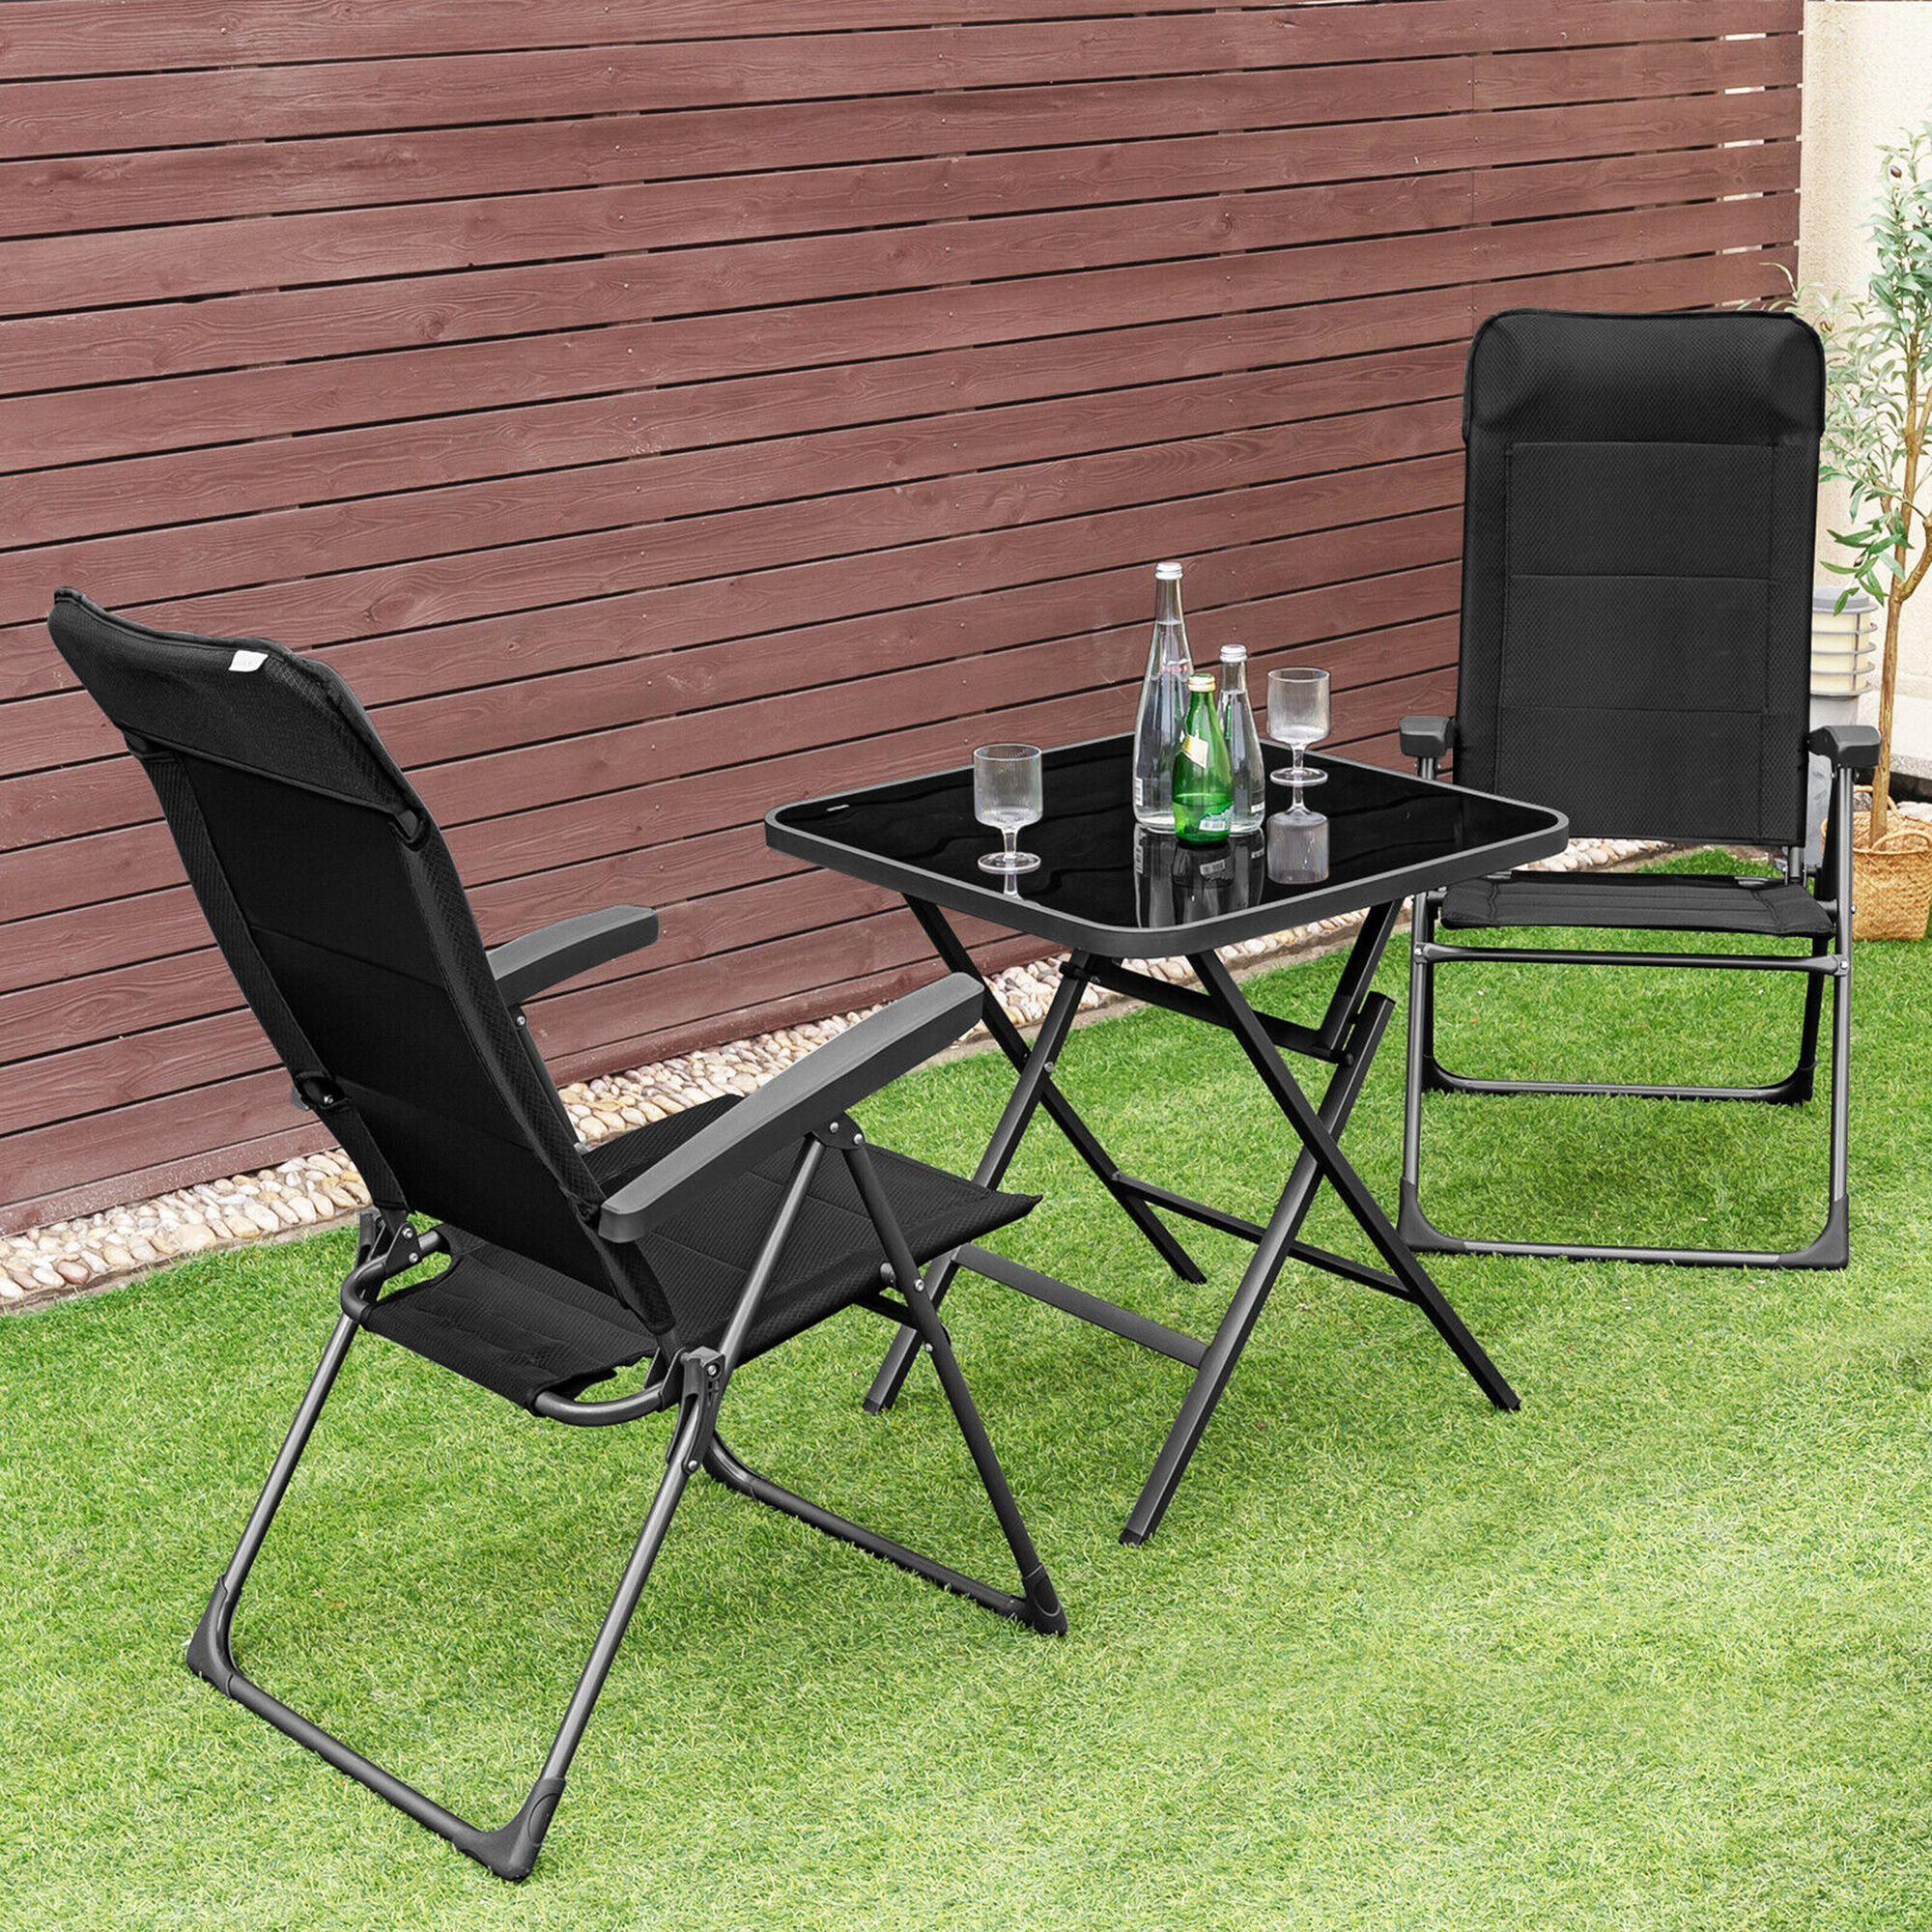 Gymax 2PCS Patio Folding Dining Chairs Portable Camping Headrest Adjust Black - image 4 of 10